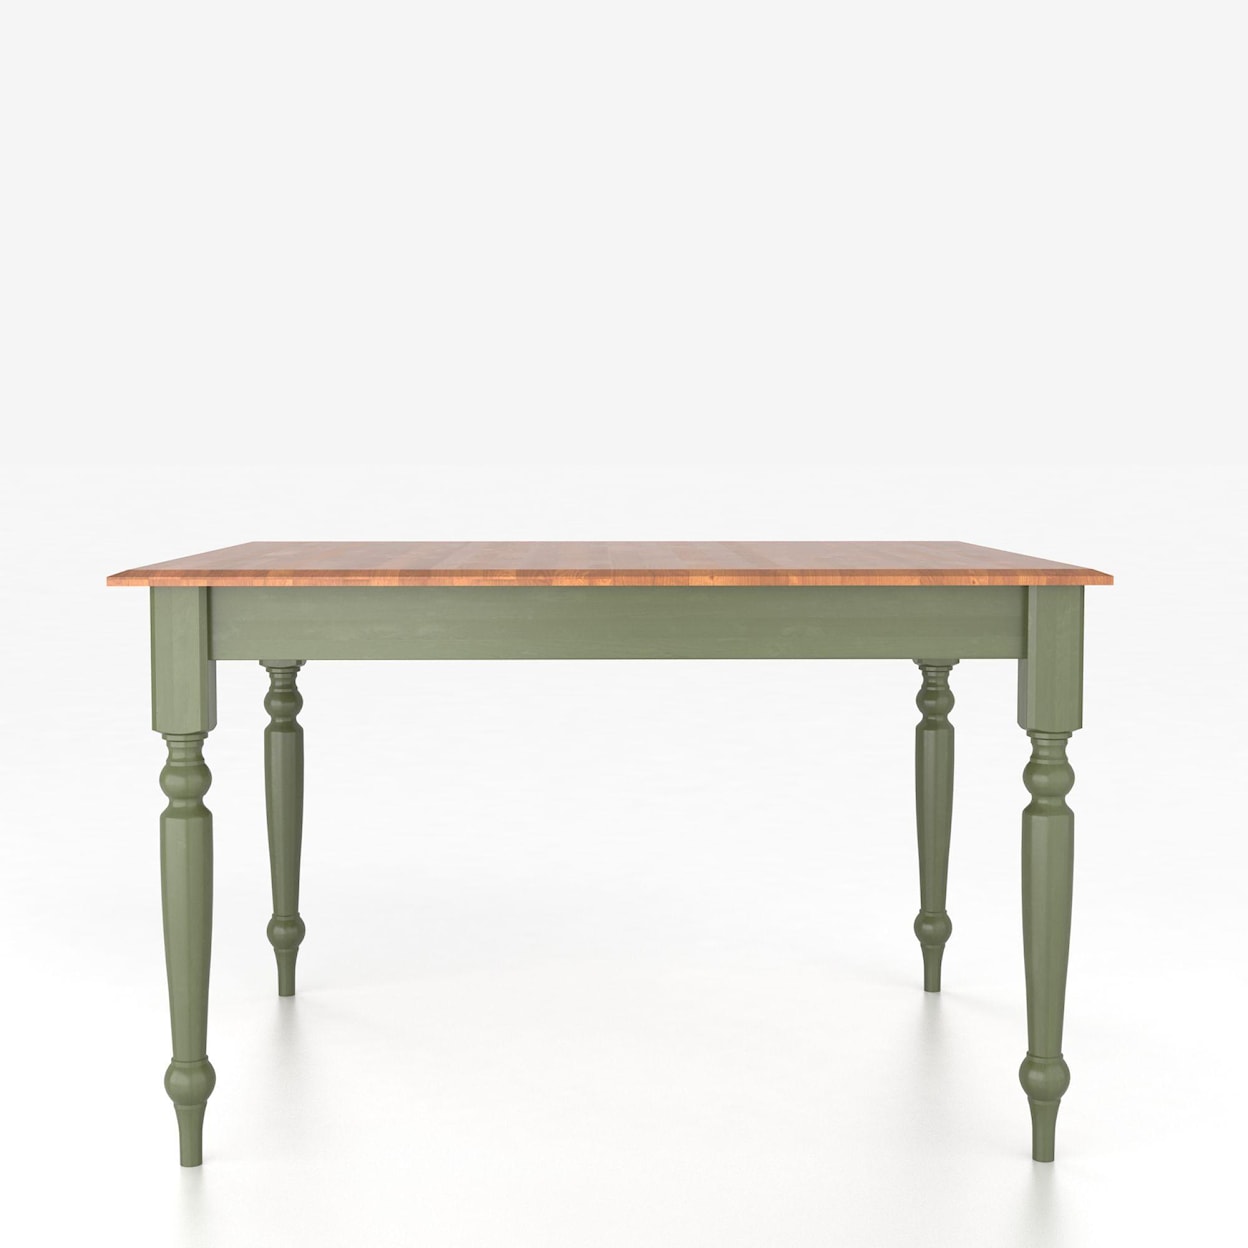 Canadel Custom Dining Tables <b>Customizable</b> Square Table with Legs